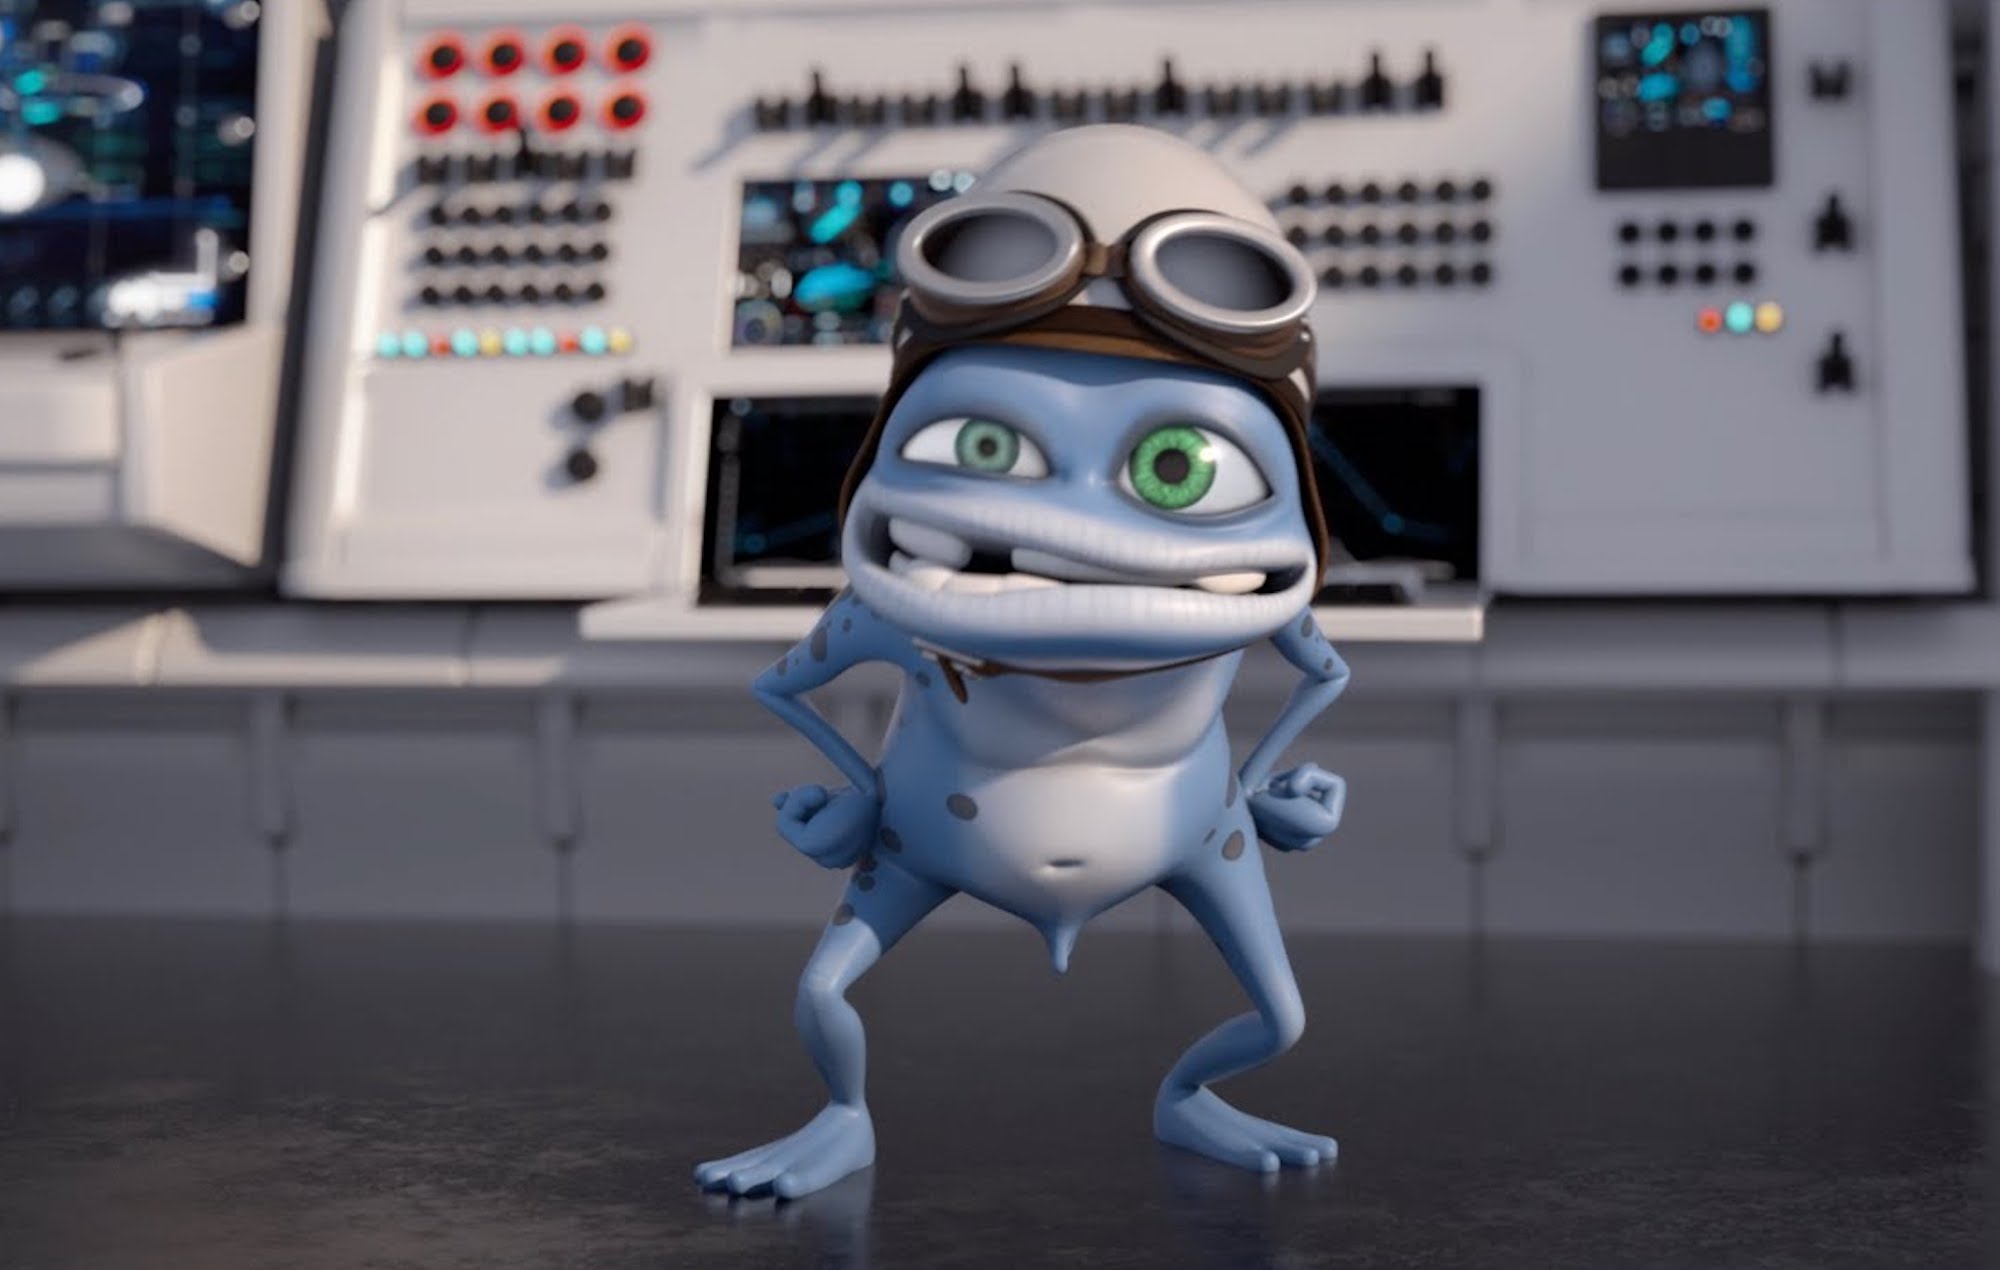 Crazy Frog is getting death threats over NFT collection